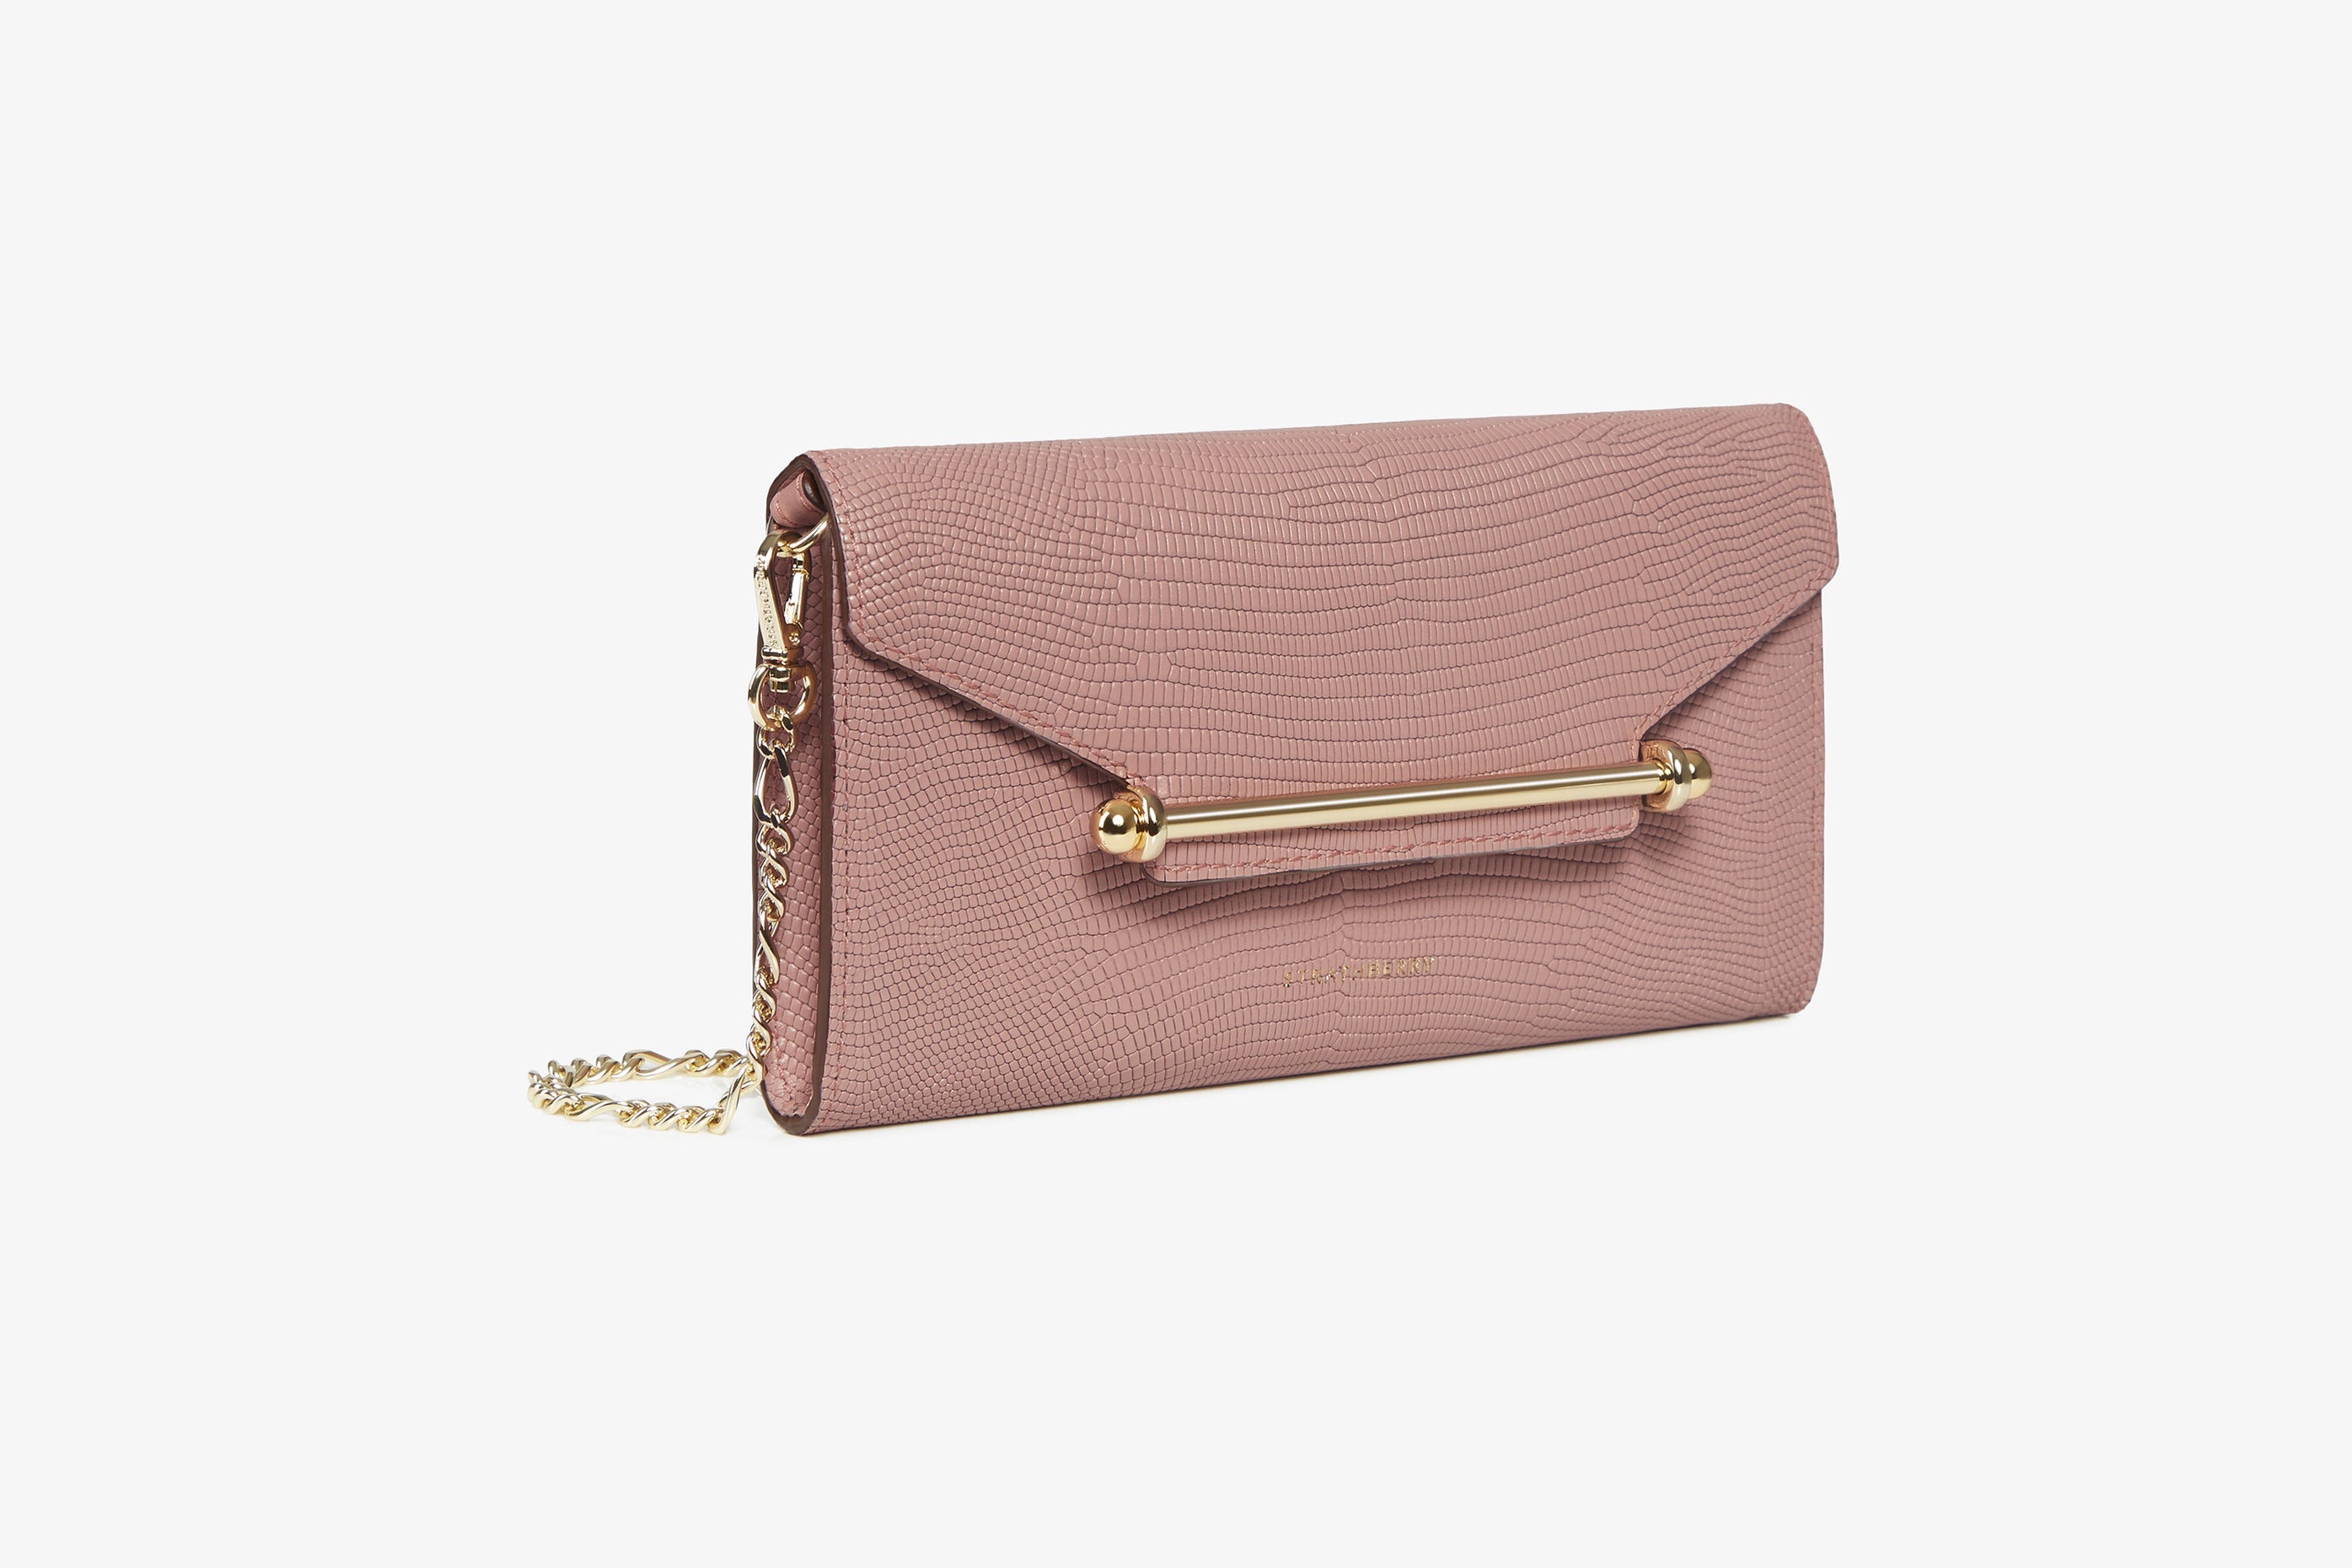 Strathberry - Multrees Chain Wallet - Crossbody Leather Mini Clutch ...